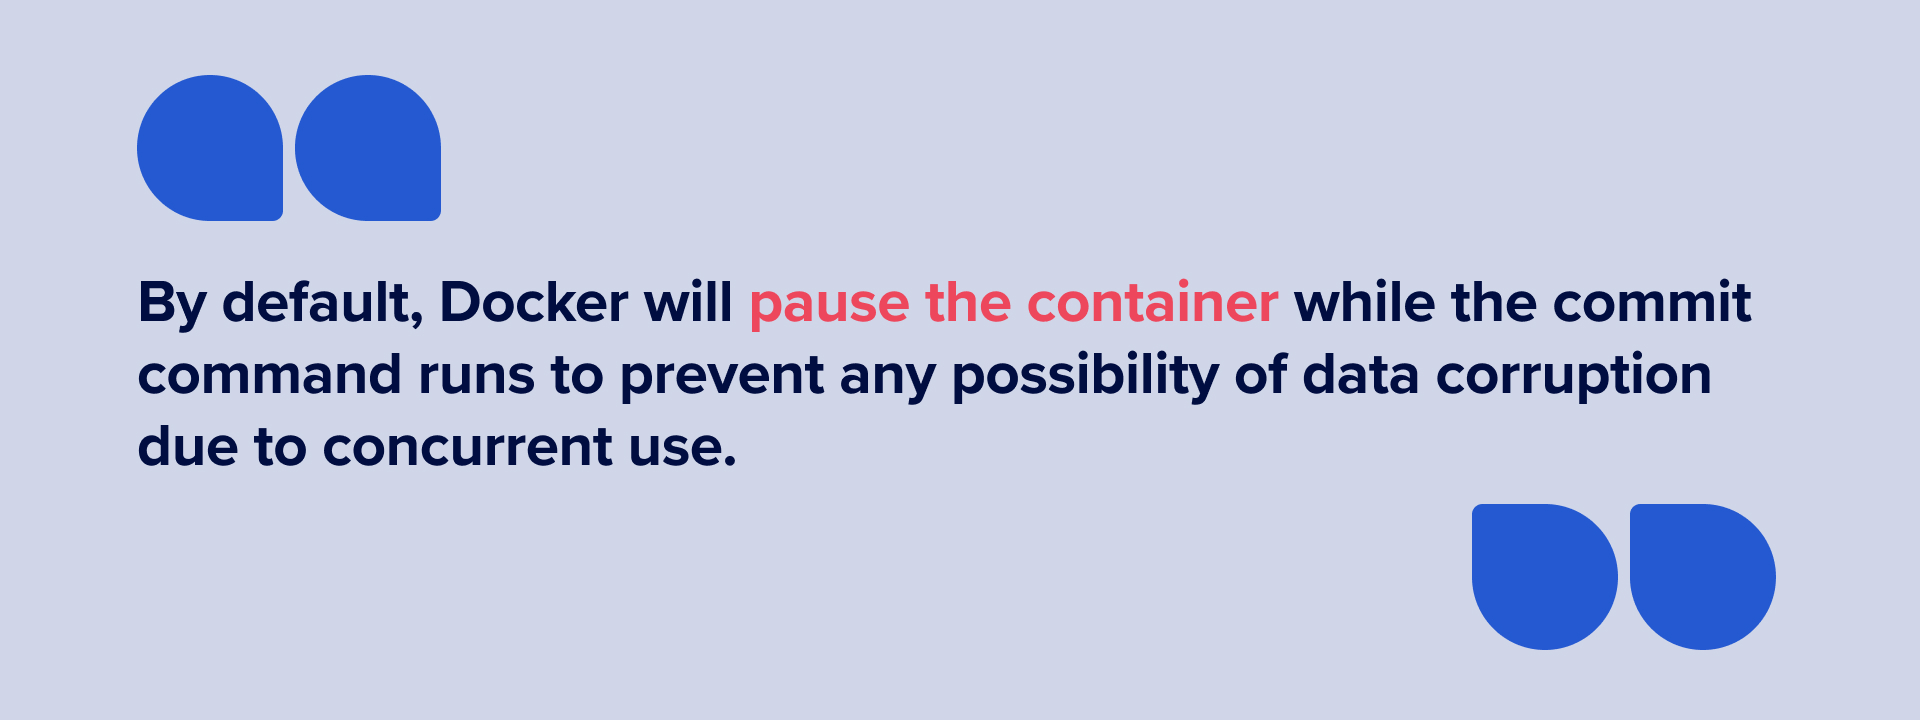 kosli quote about docker pause container commit command